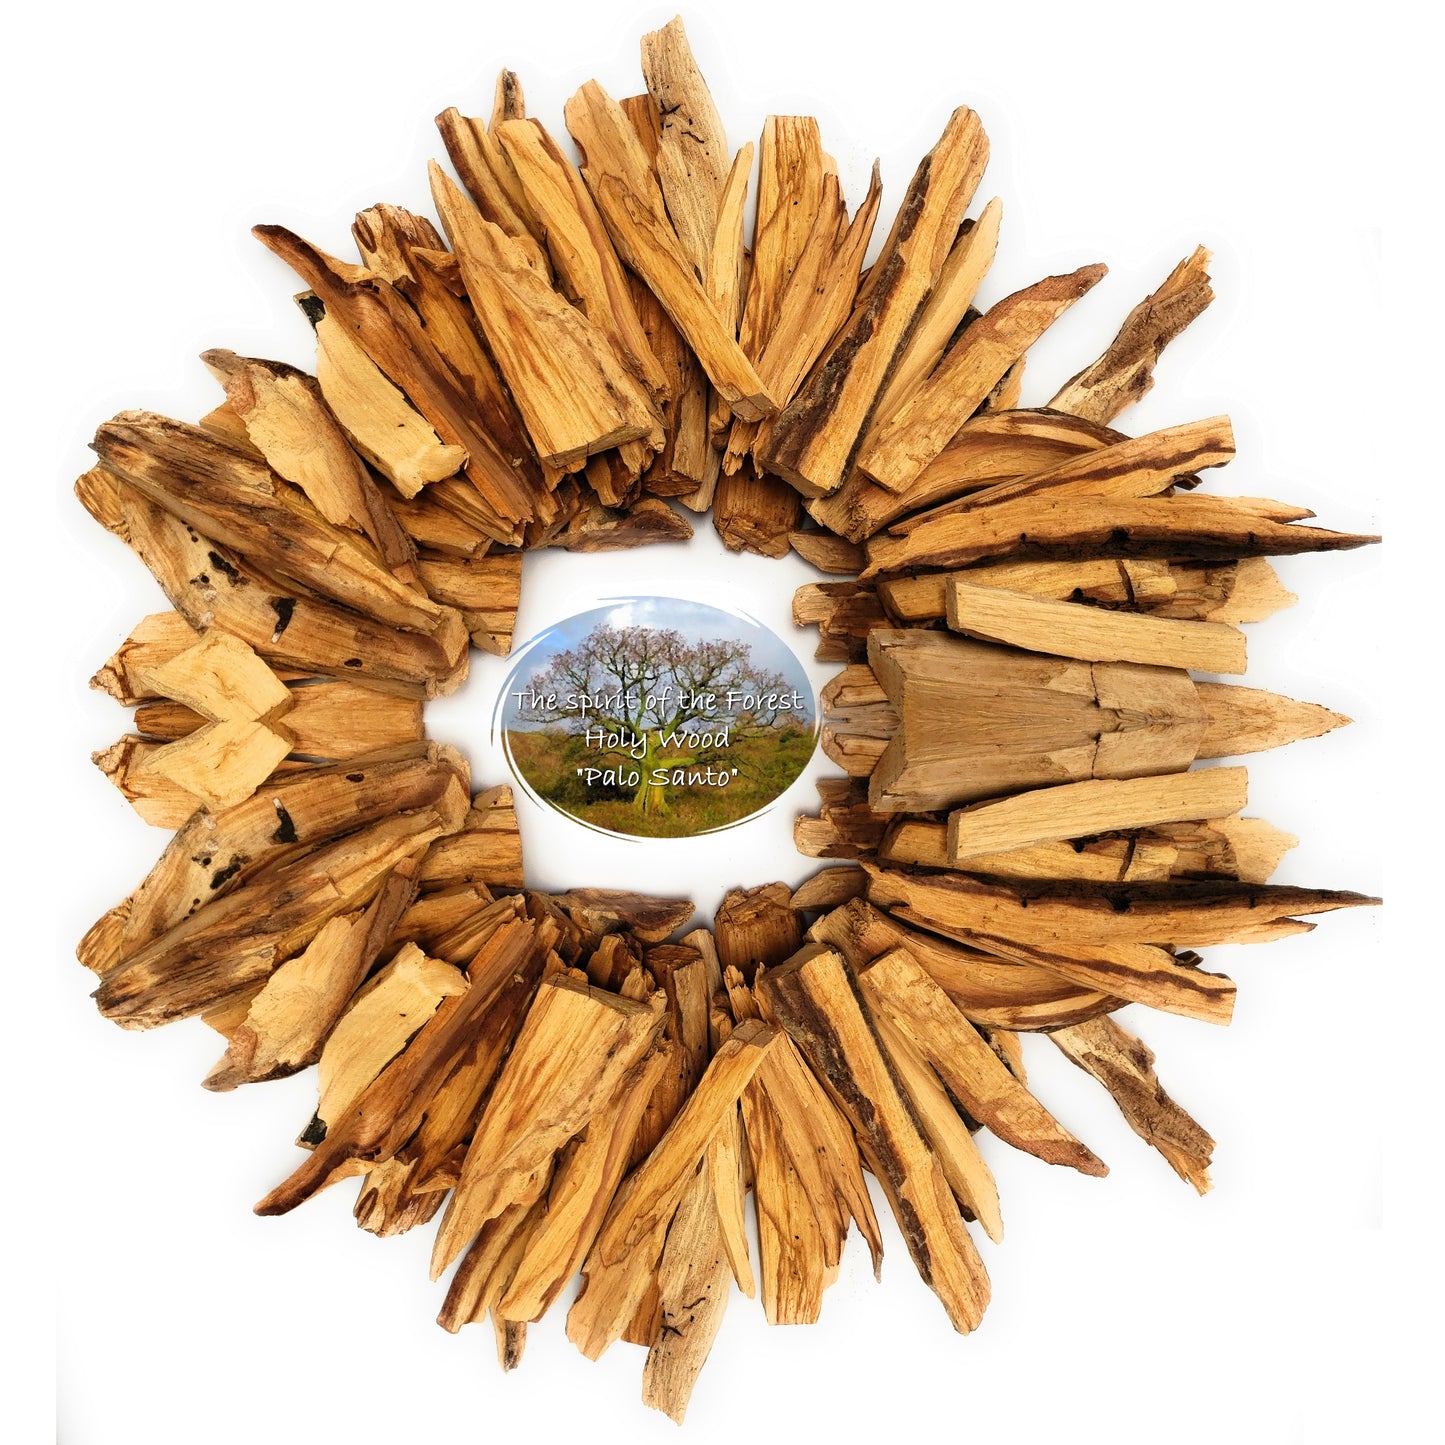 The Spirit of the Forest Authentic  mystical Palo Santo   Holy Wood 100% Natural - UproMax